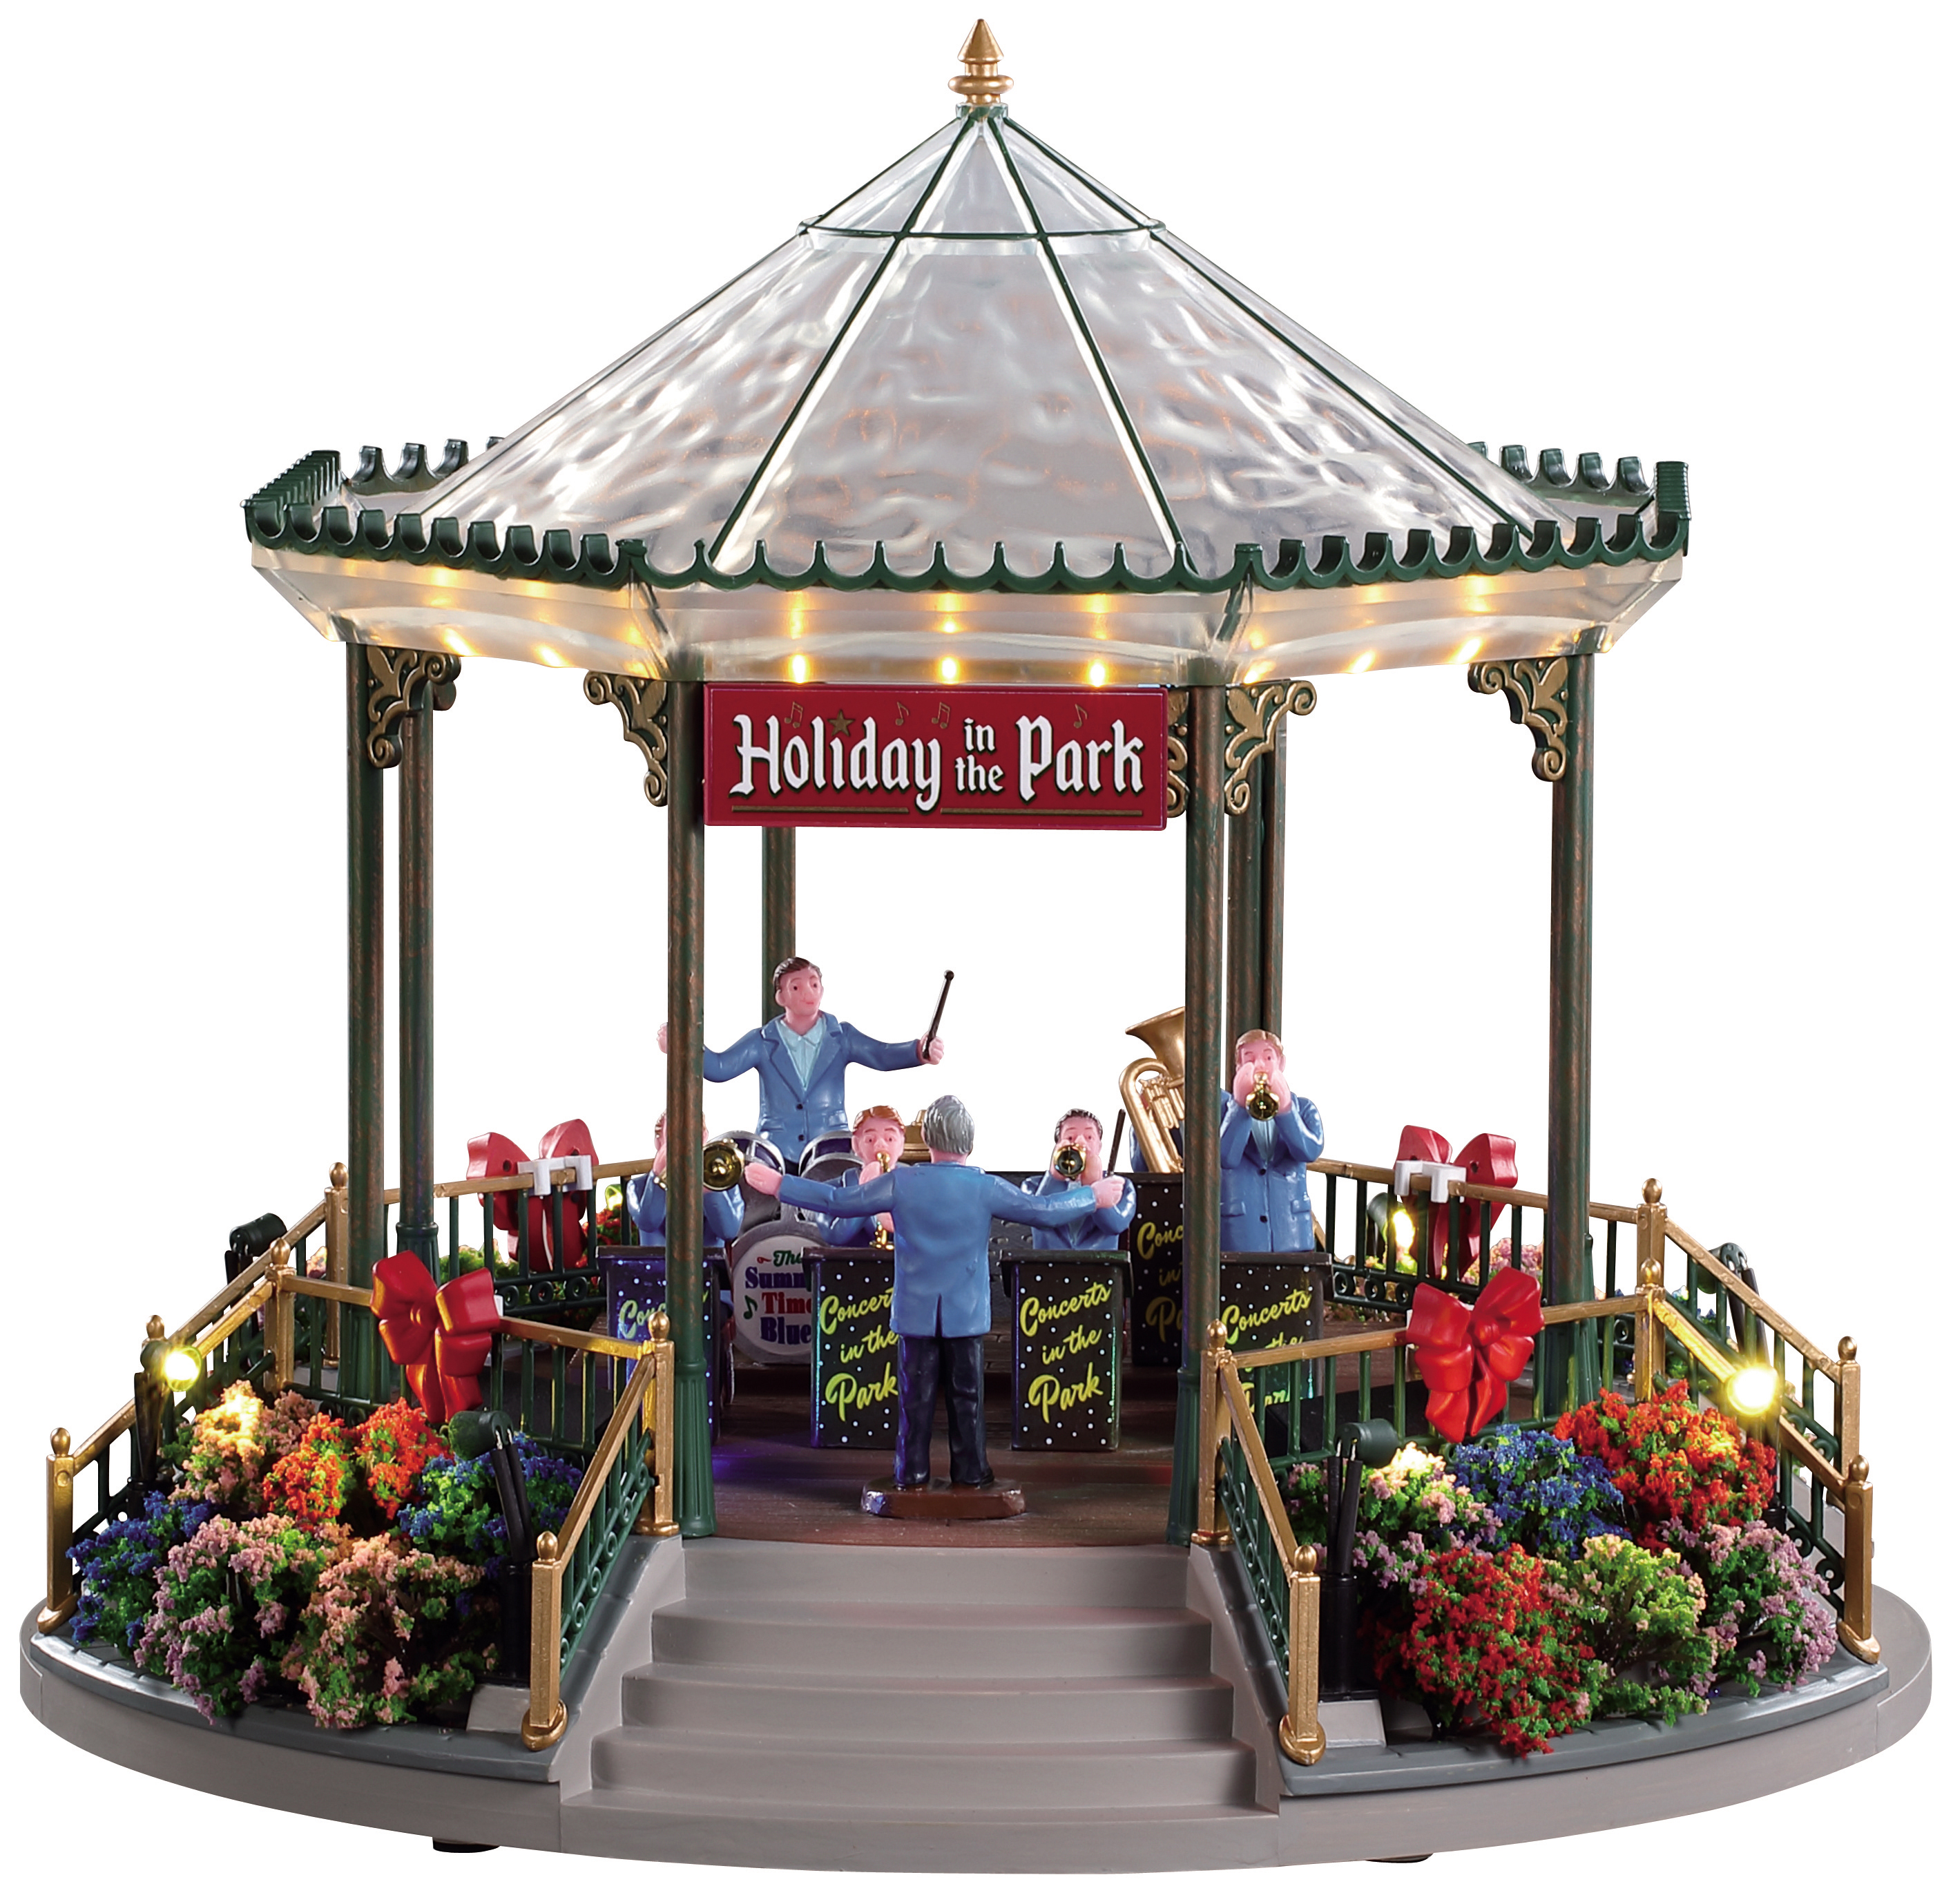 Lemax Holiday Garden Green Bandstand Village Accessory